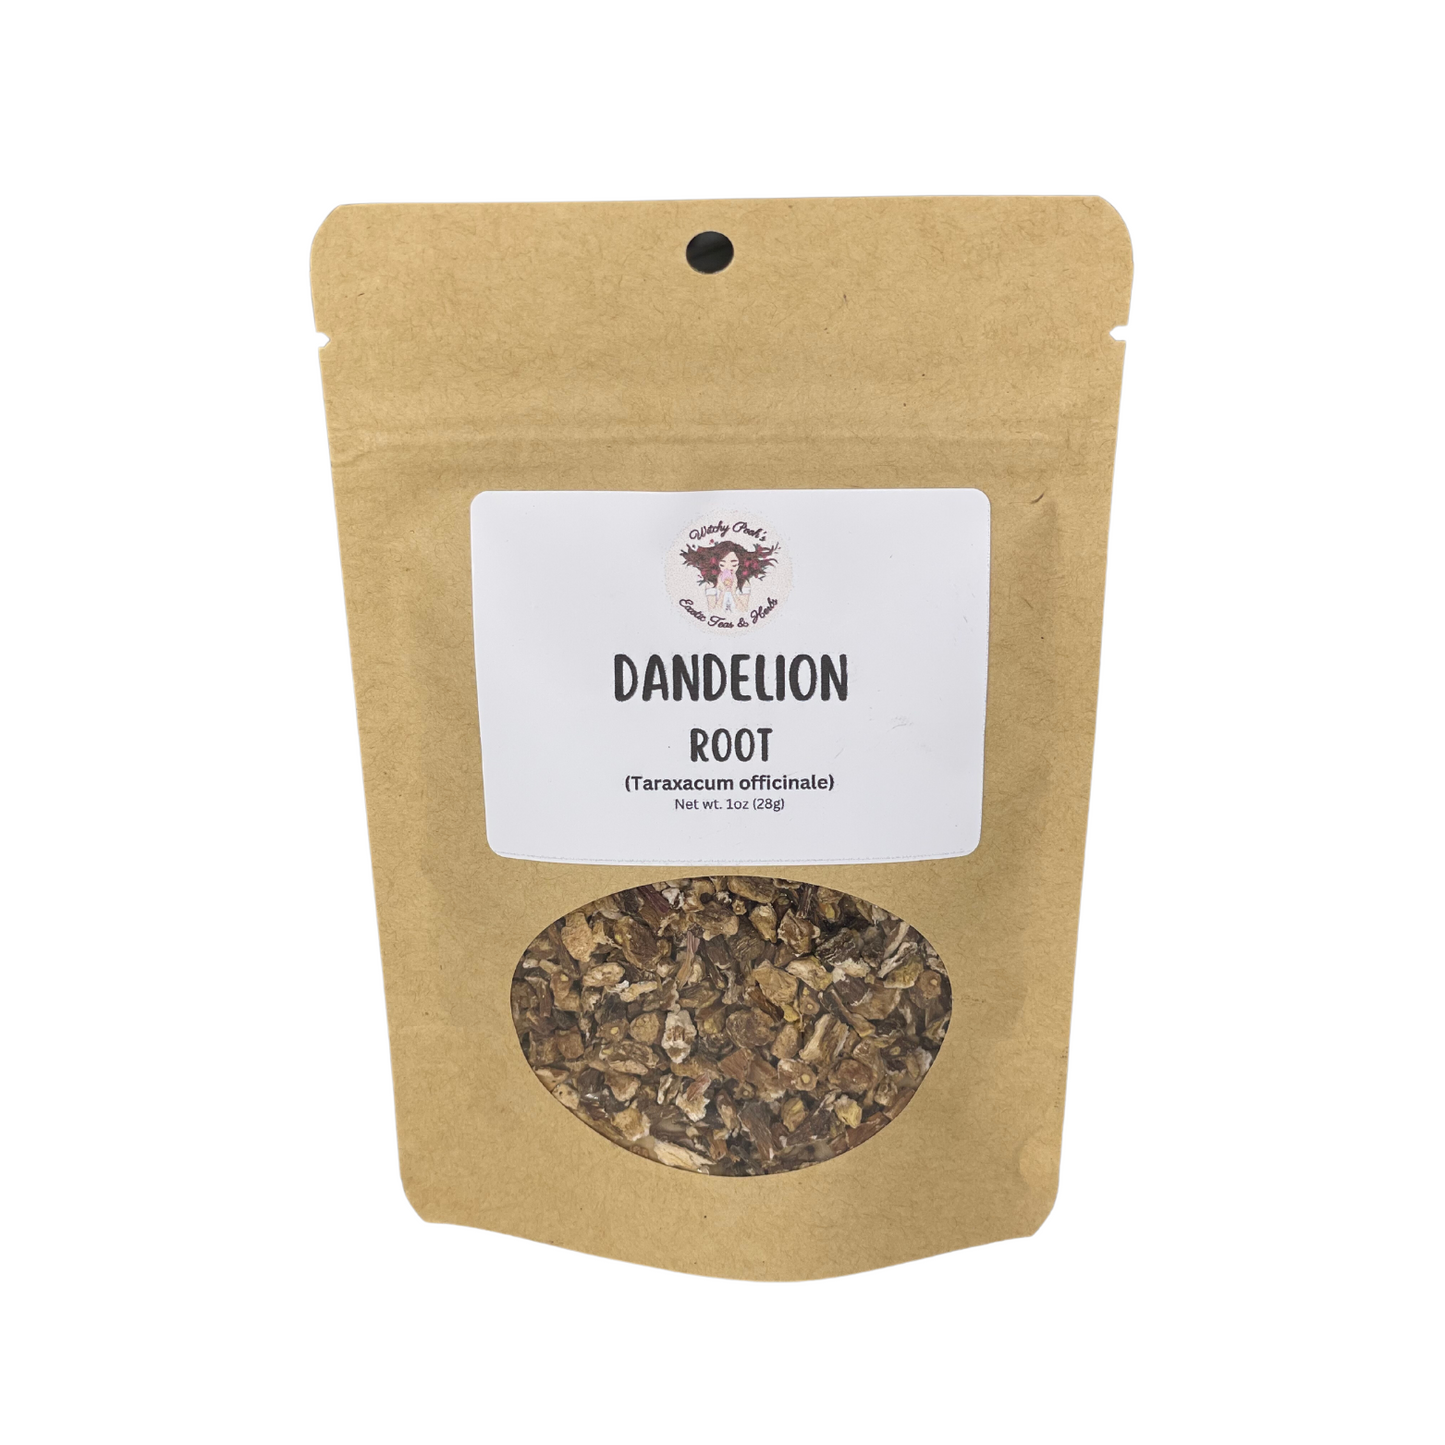 Dandelion Root Loose Leaf Herbal Tea for Purification Rituals and Healing Ceremonies.